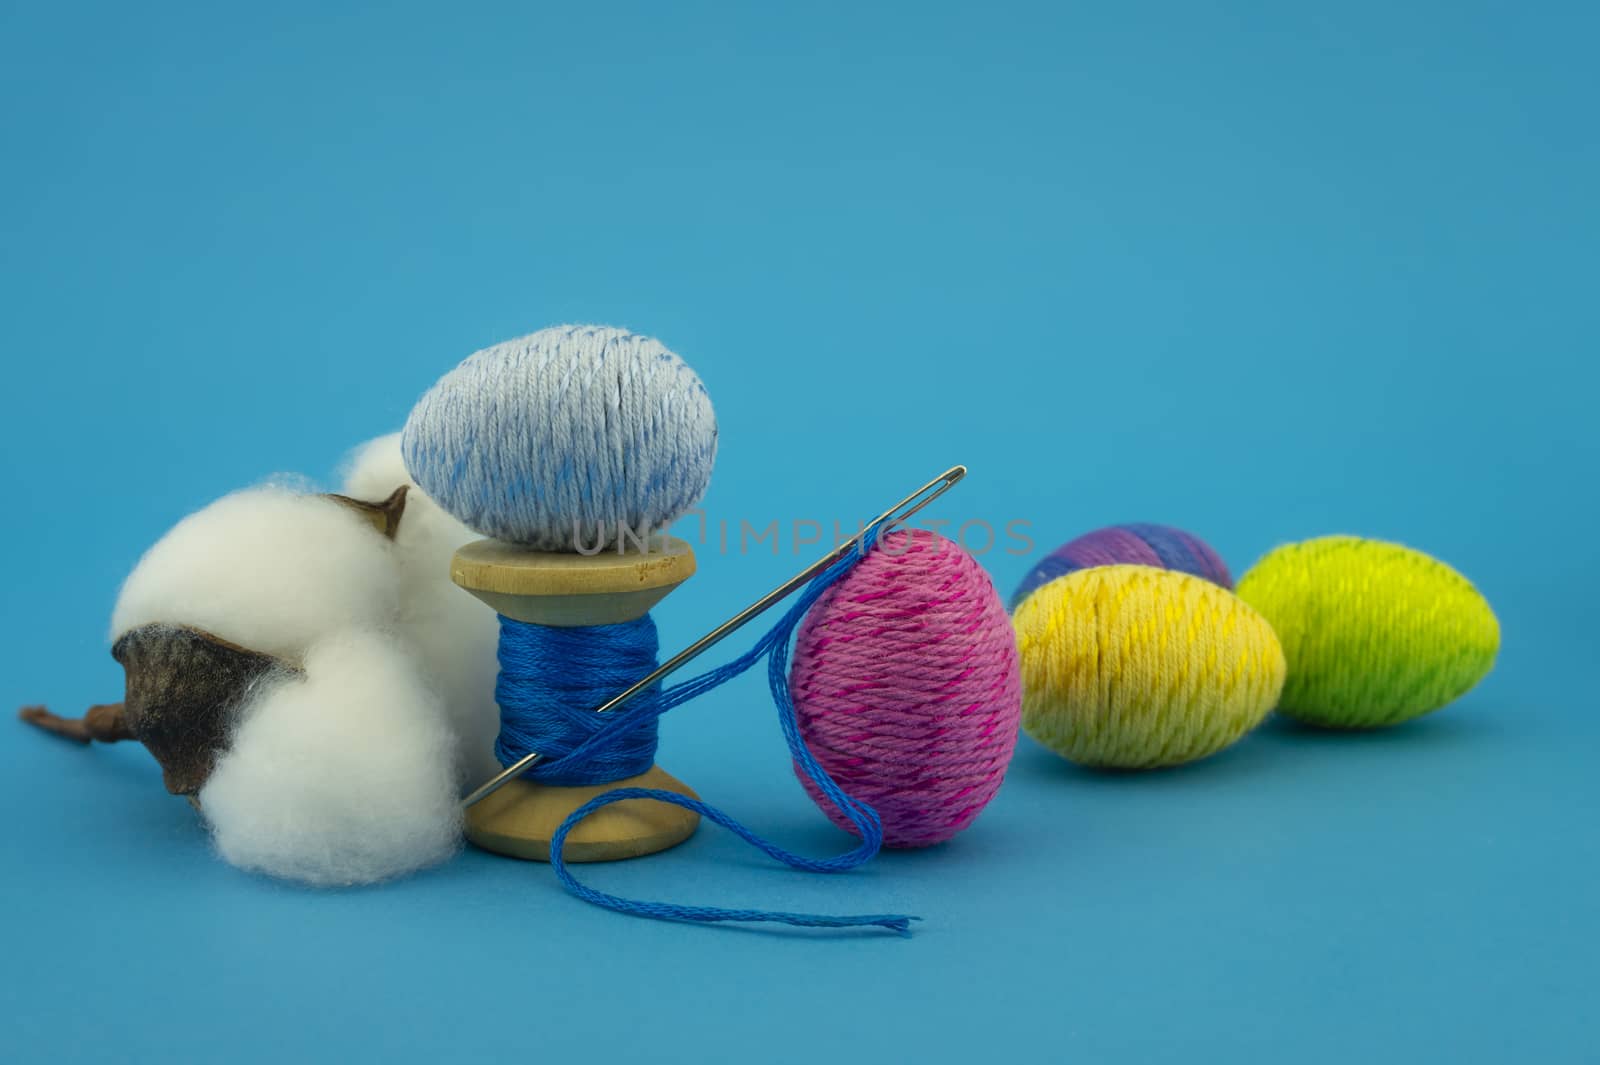 Handcrafted Easter decorations from natural cotton with a cotton boll off the plant alongside a reel of blue thread with needle and creative colorful eggs made from yarn over a blue background